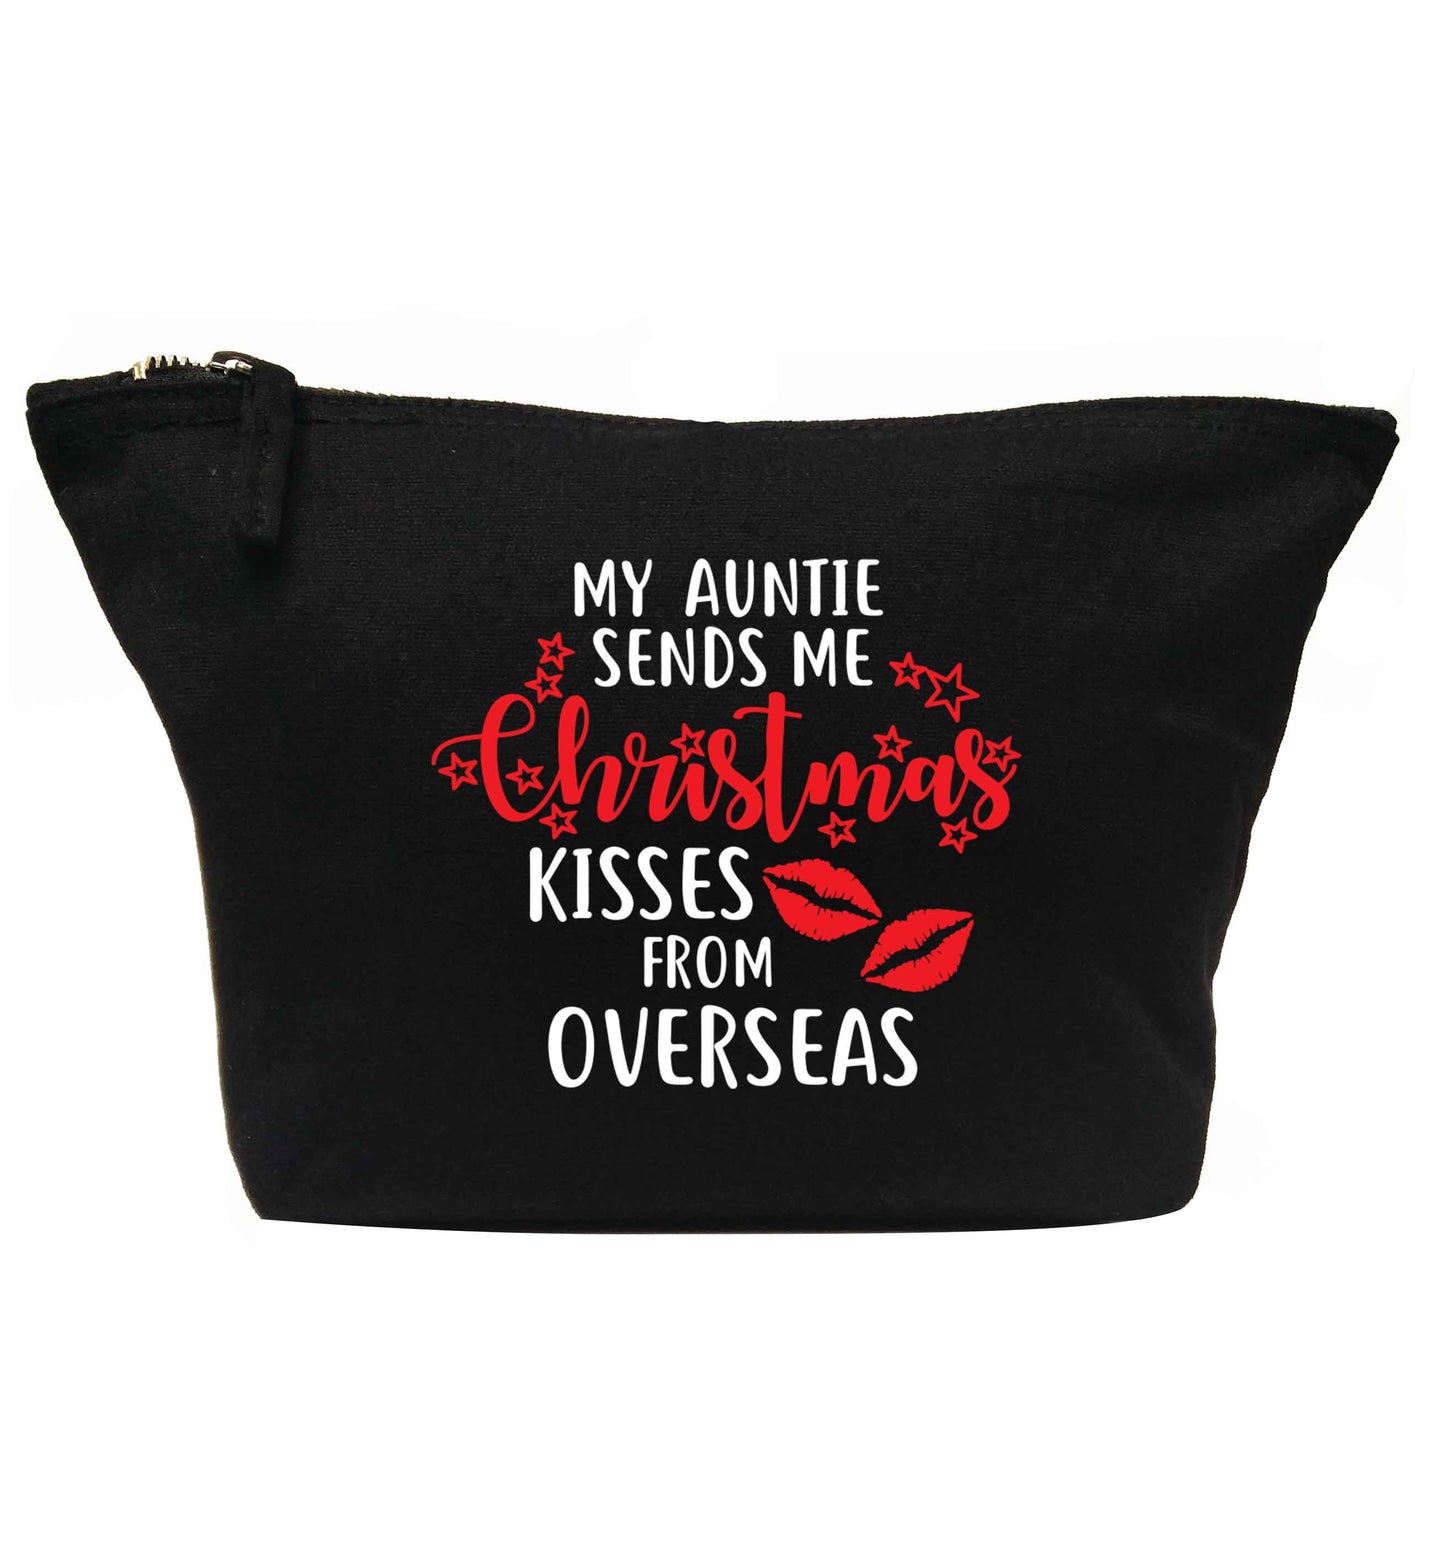 My auntie sends me Christmas kisses from overseas | Makeup / wash bag